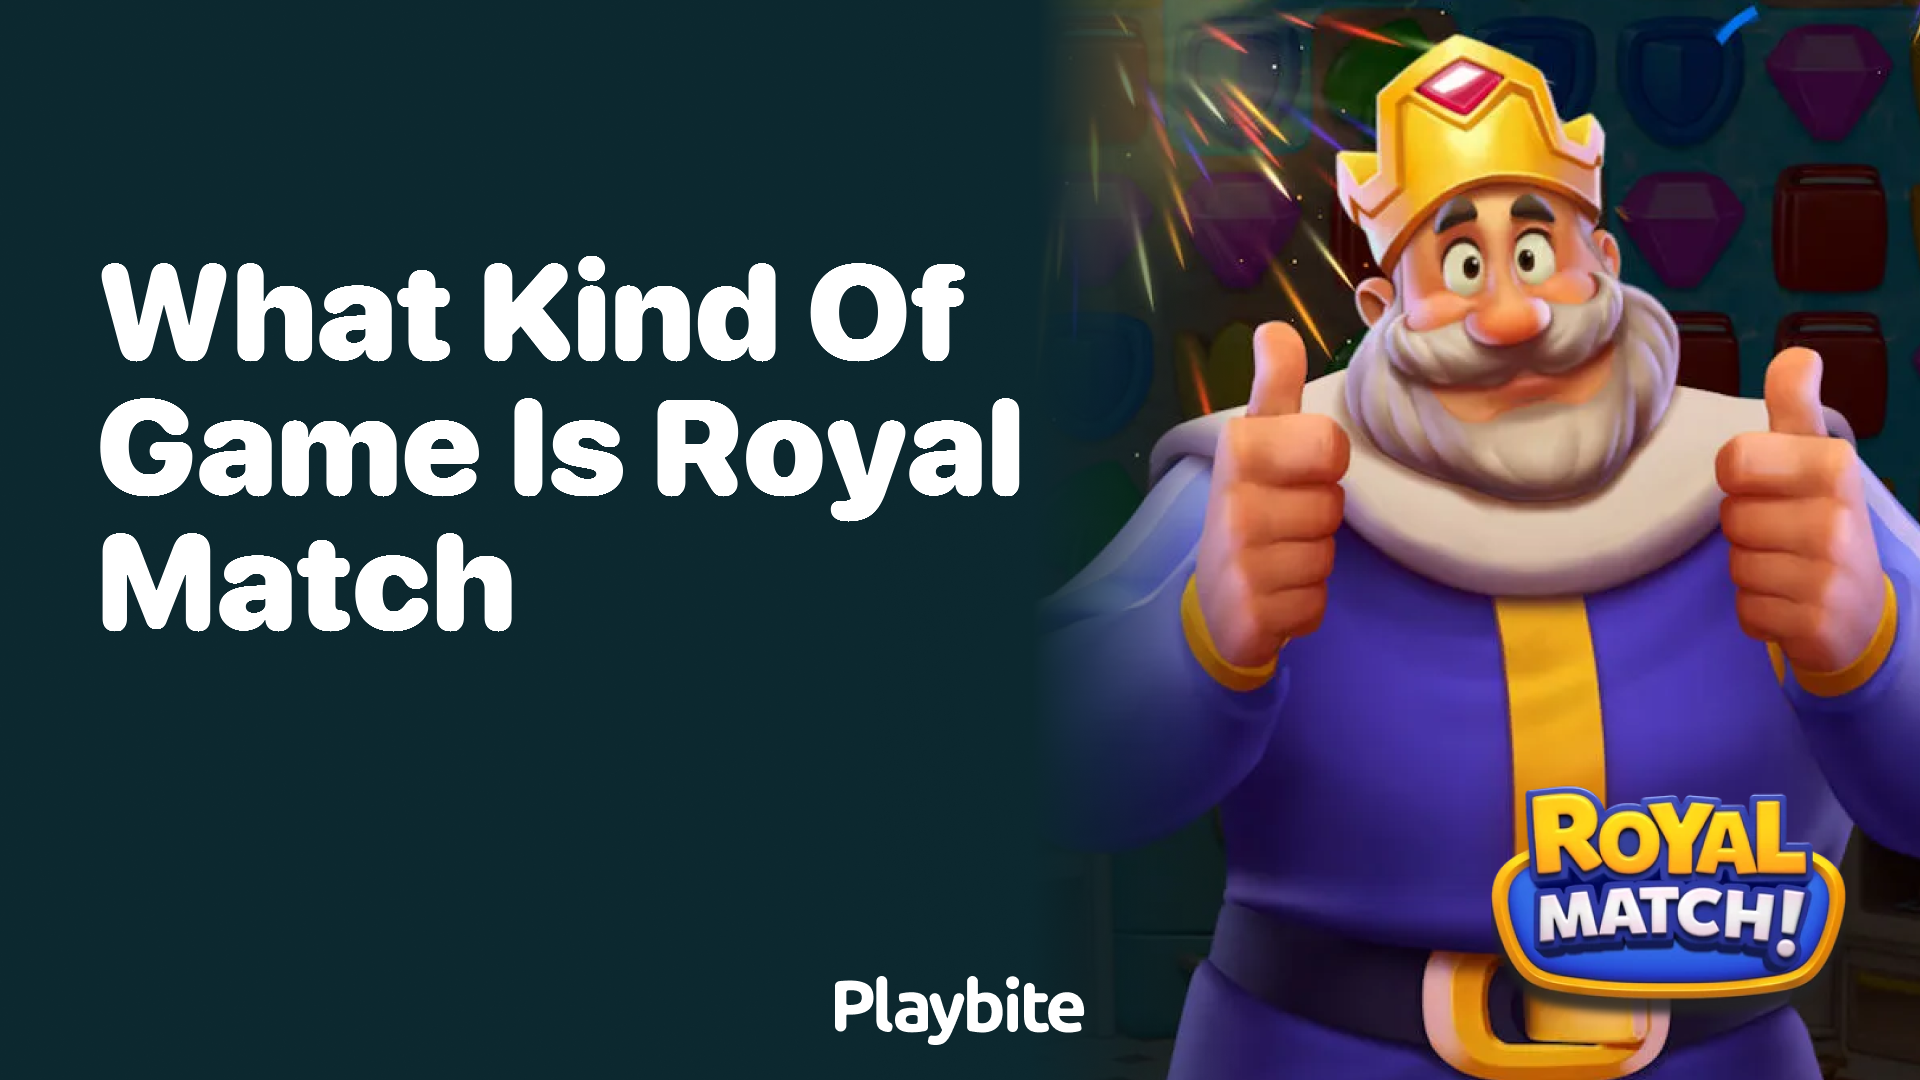 What Kind of Game Is Royal Match?